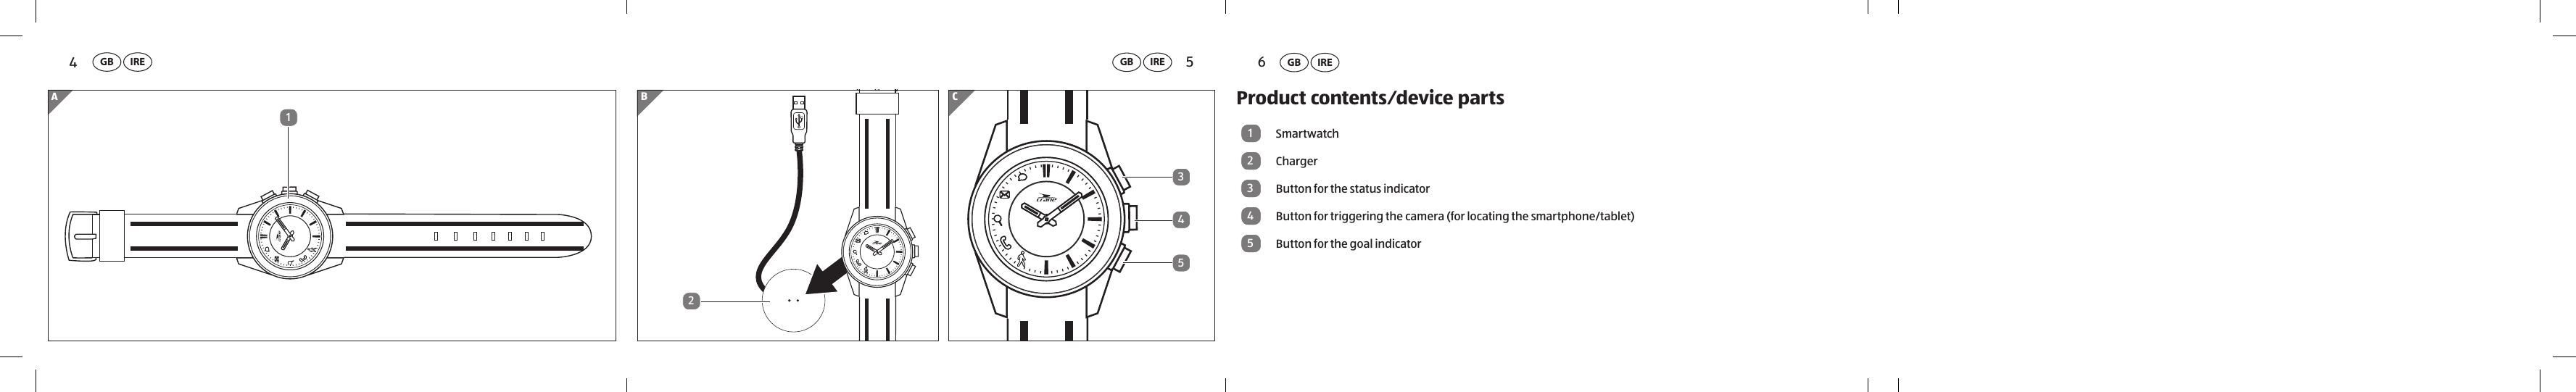 CBA12543Overview GB IRE654Product contents⁄device parts1Smartwatch2Charger3Button for the status indicator4Button for triggering the camera (for locating the smartphone/tablet)5Button for the goal indicatorGB IRE GB IRE GB IRE